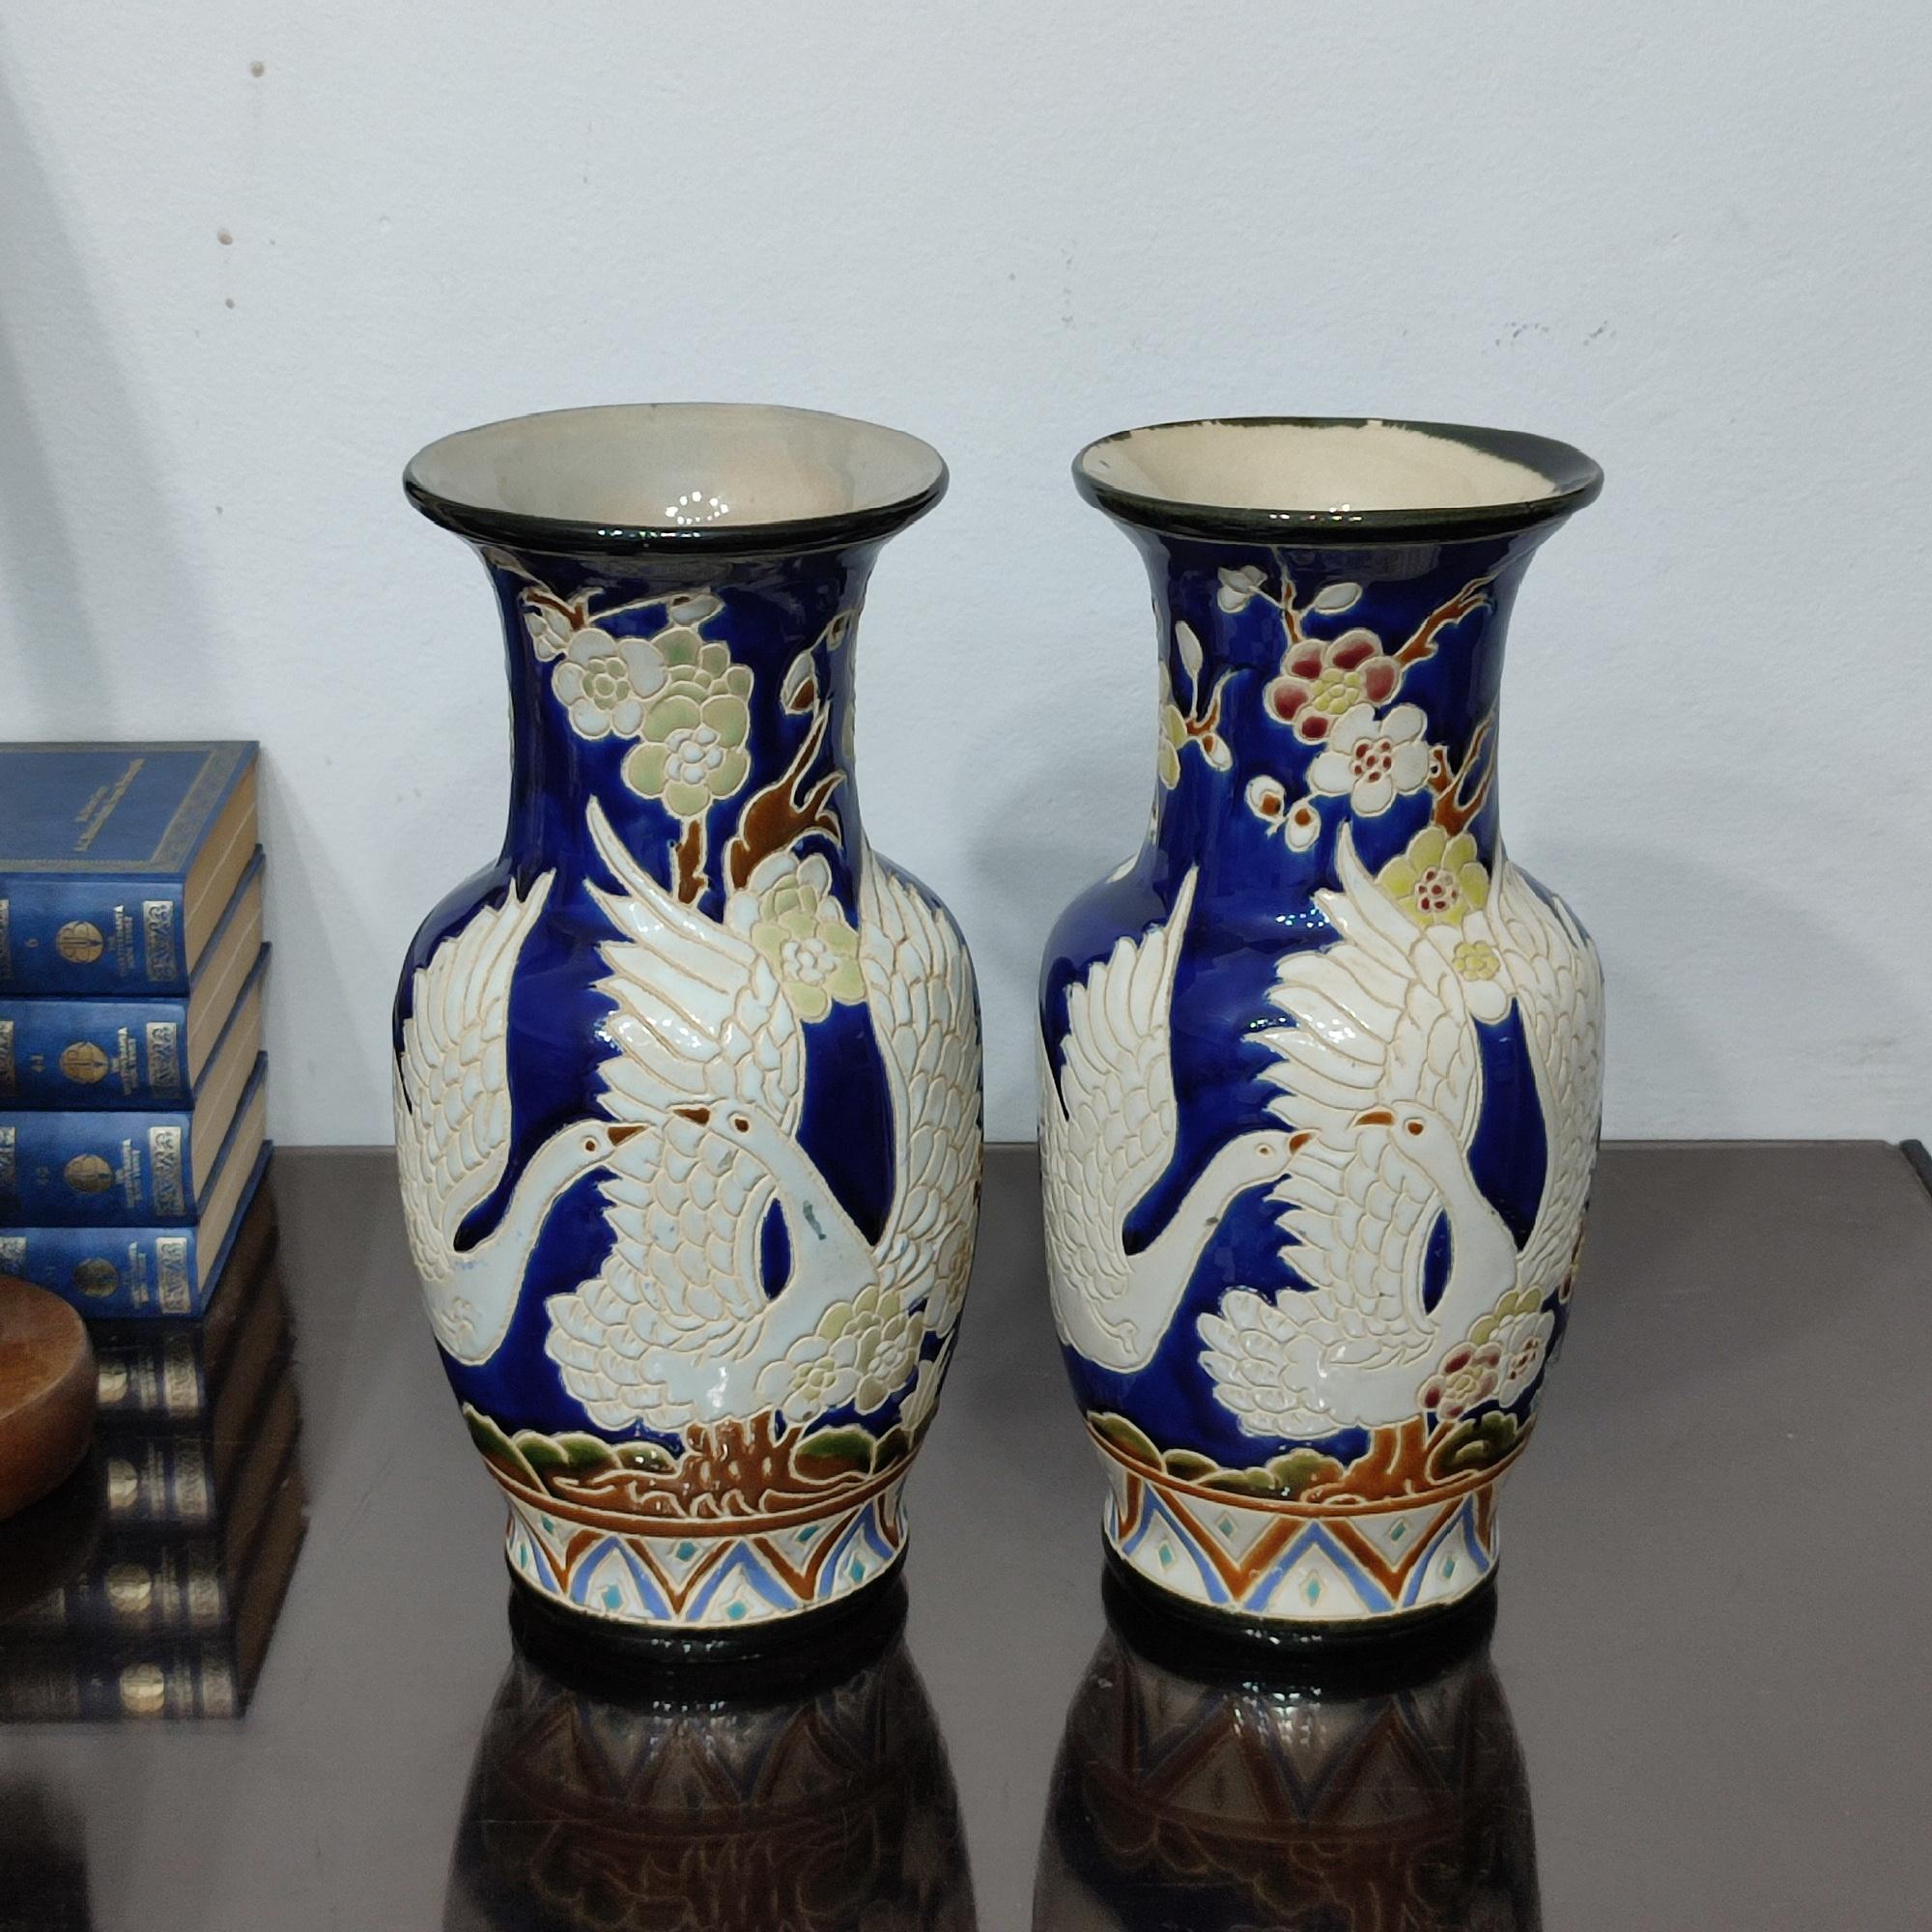 Art Deco Pair of Ceramic Vases with Wonderful Flying Swans and Cherry Flowers Decor